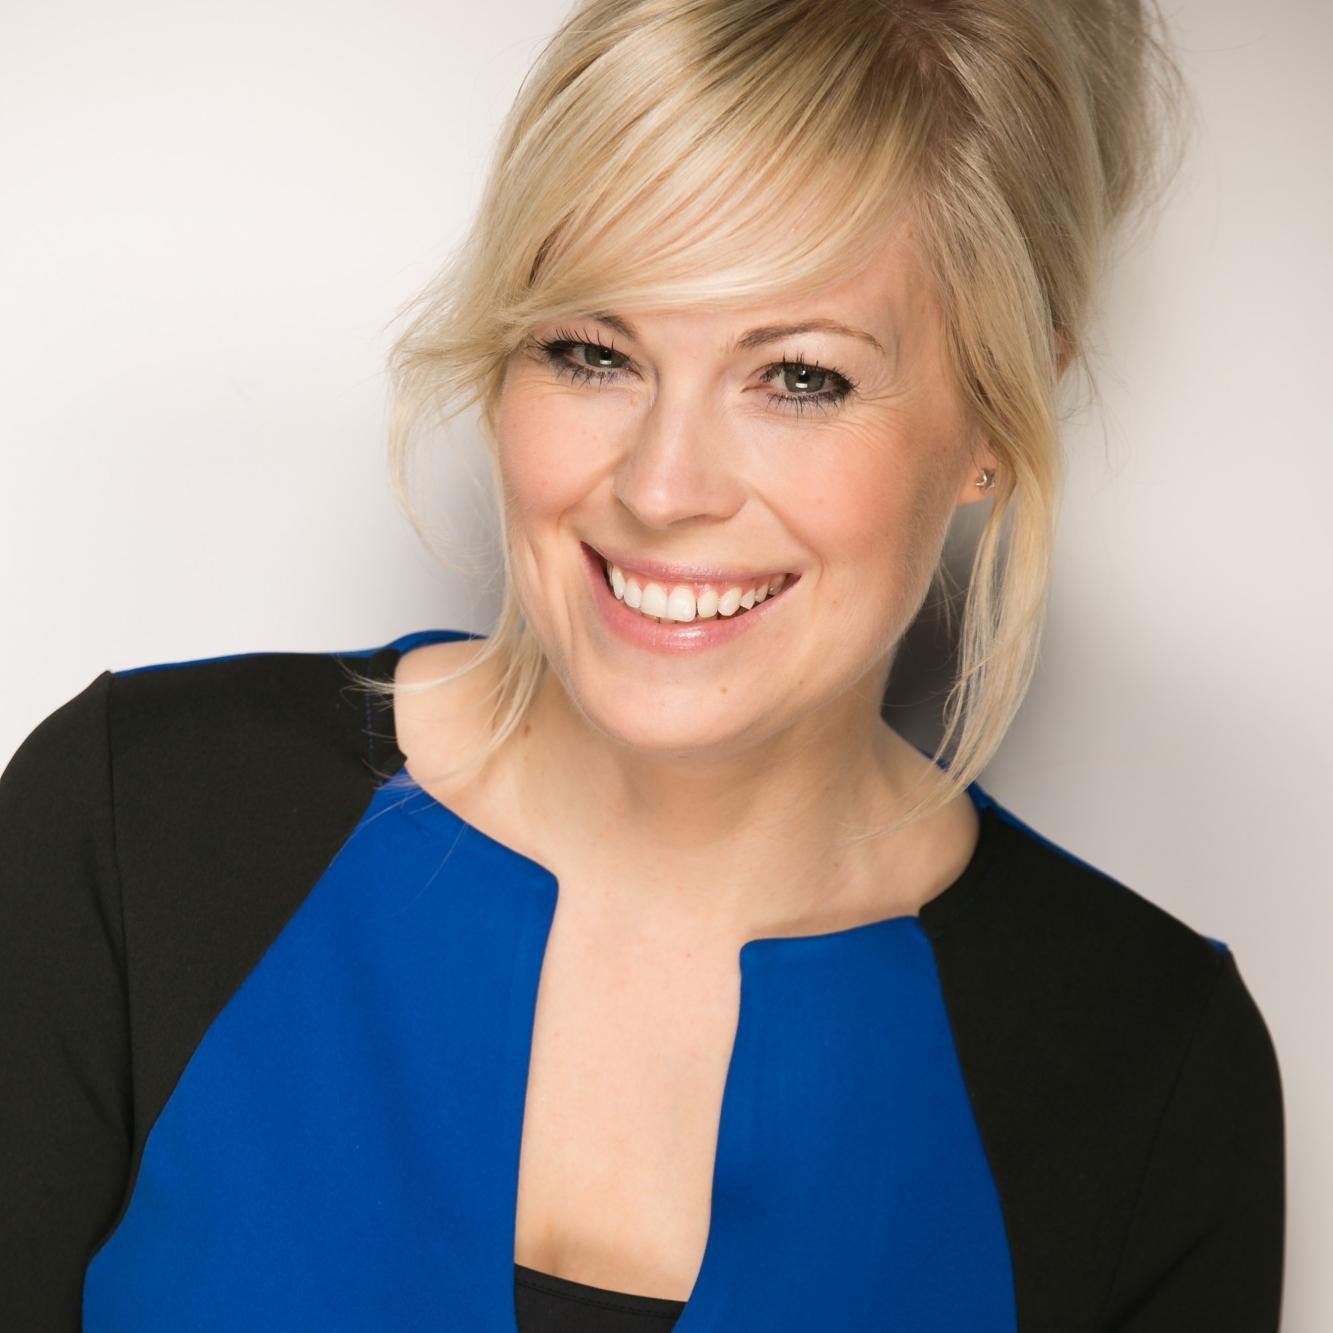 Christian Writer Says It’s Hard to Imagine Vicky Beeching is Gay Because Men Find Her Attractive